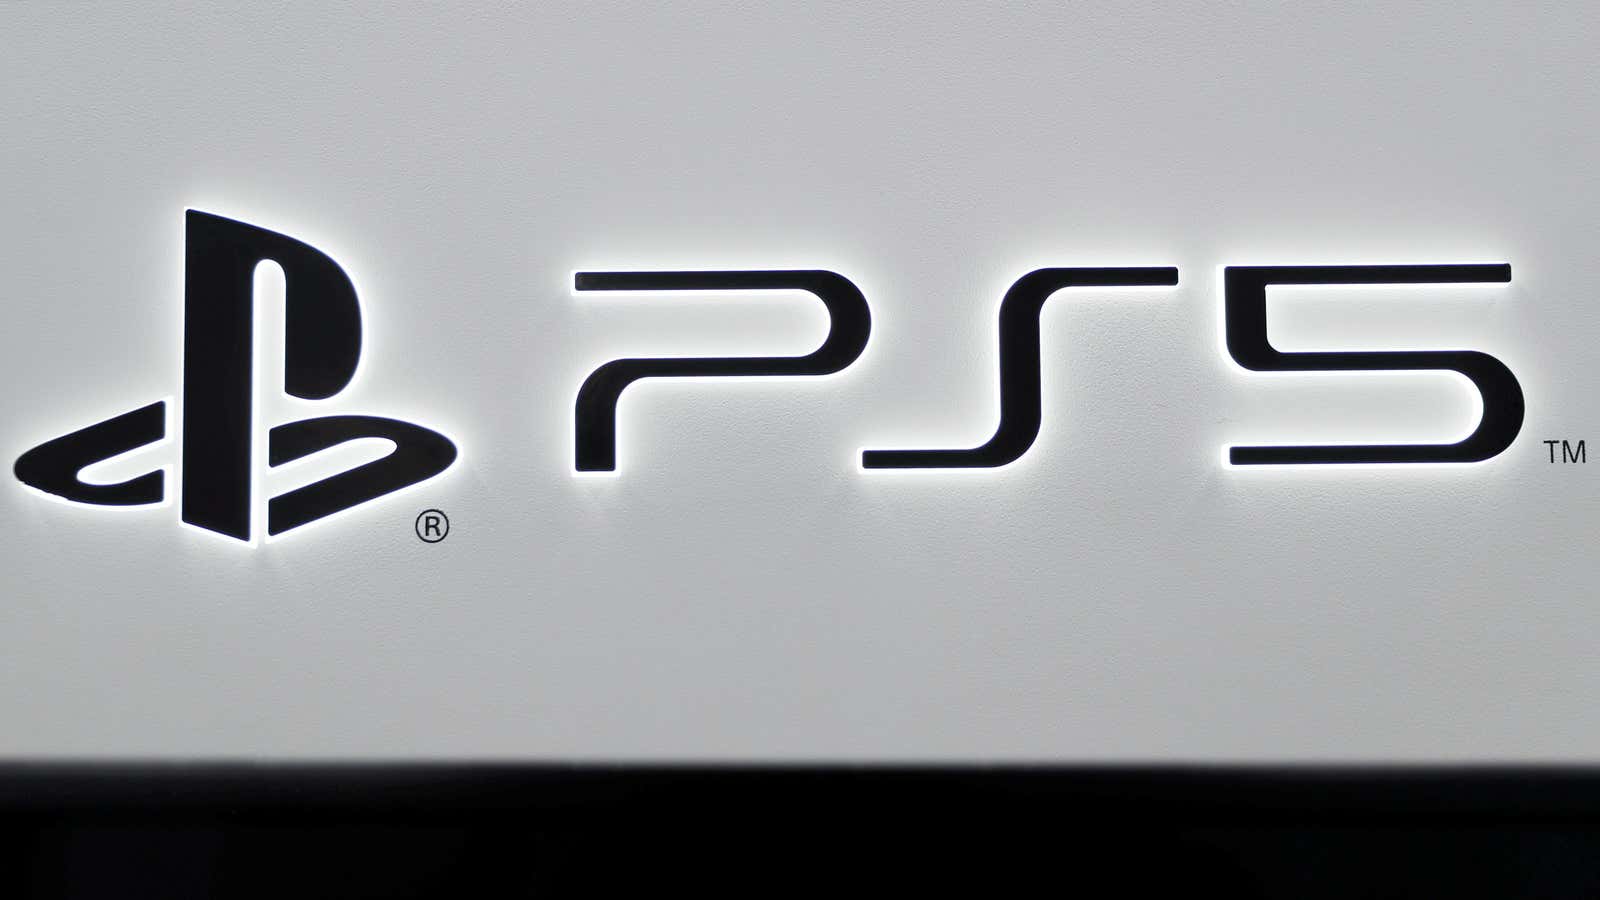 Even with the PS5 shortage, Sony's PlayStation had a record year